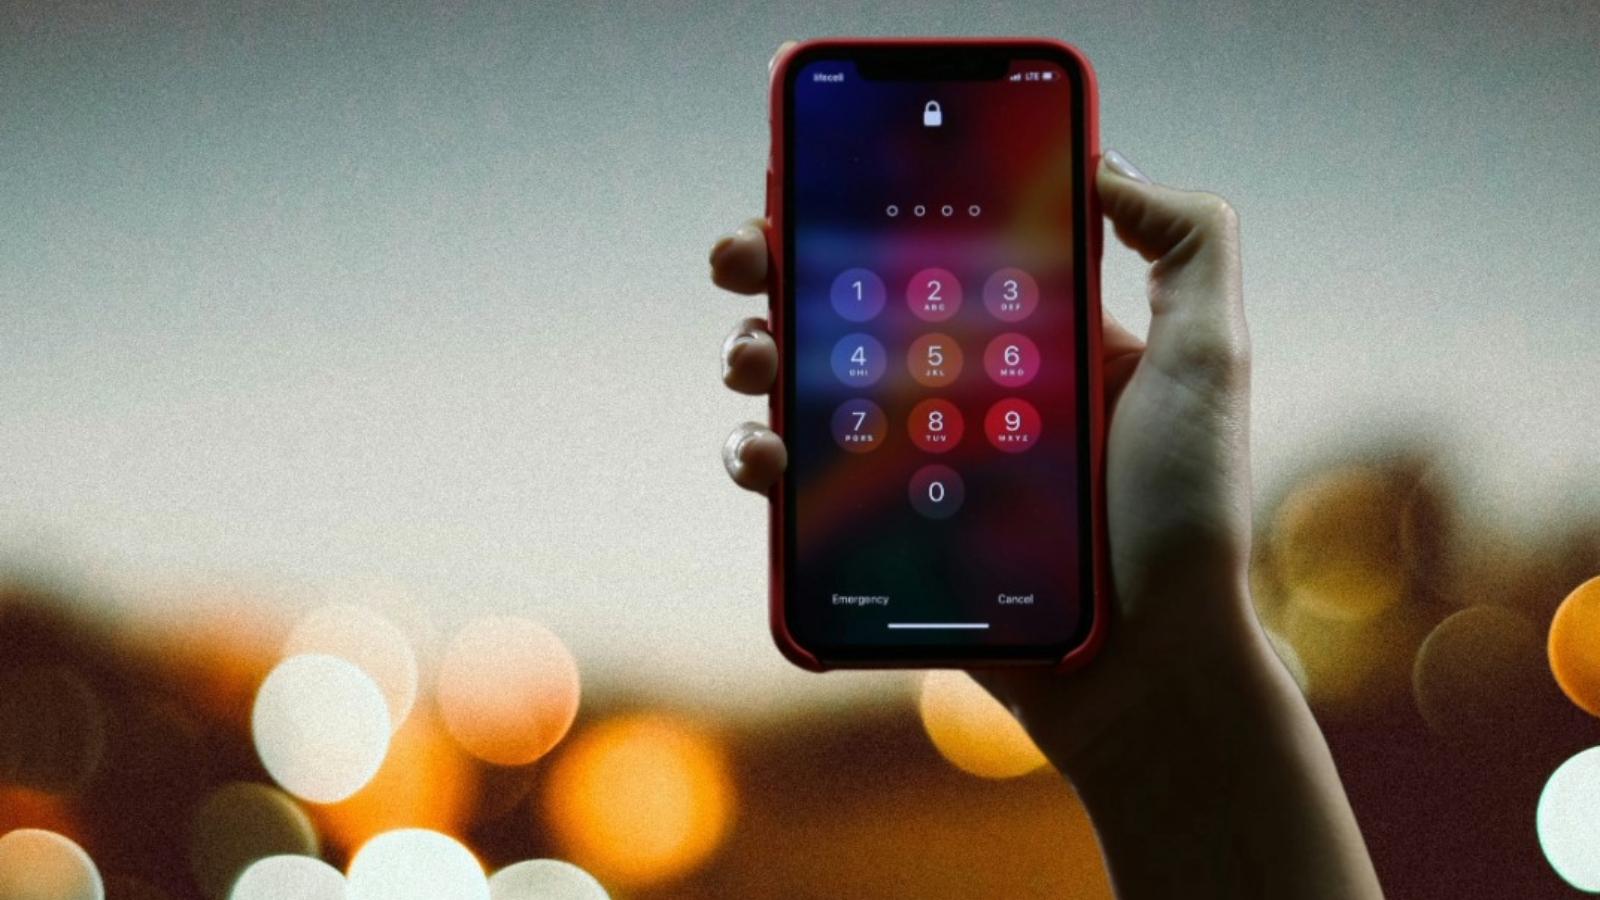 iPhone user showing a locked iPhone